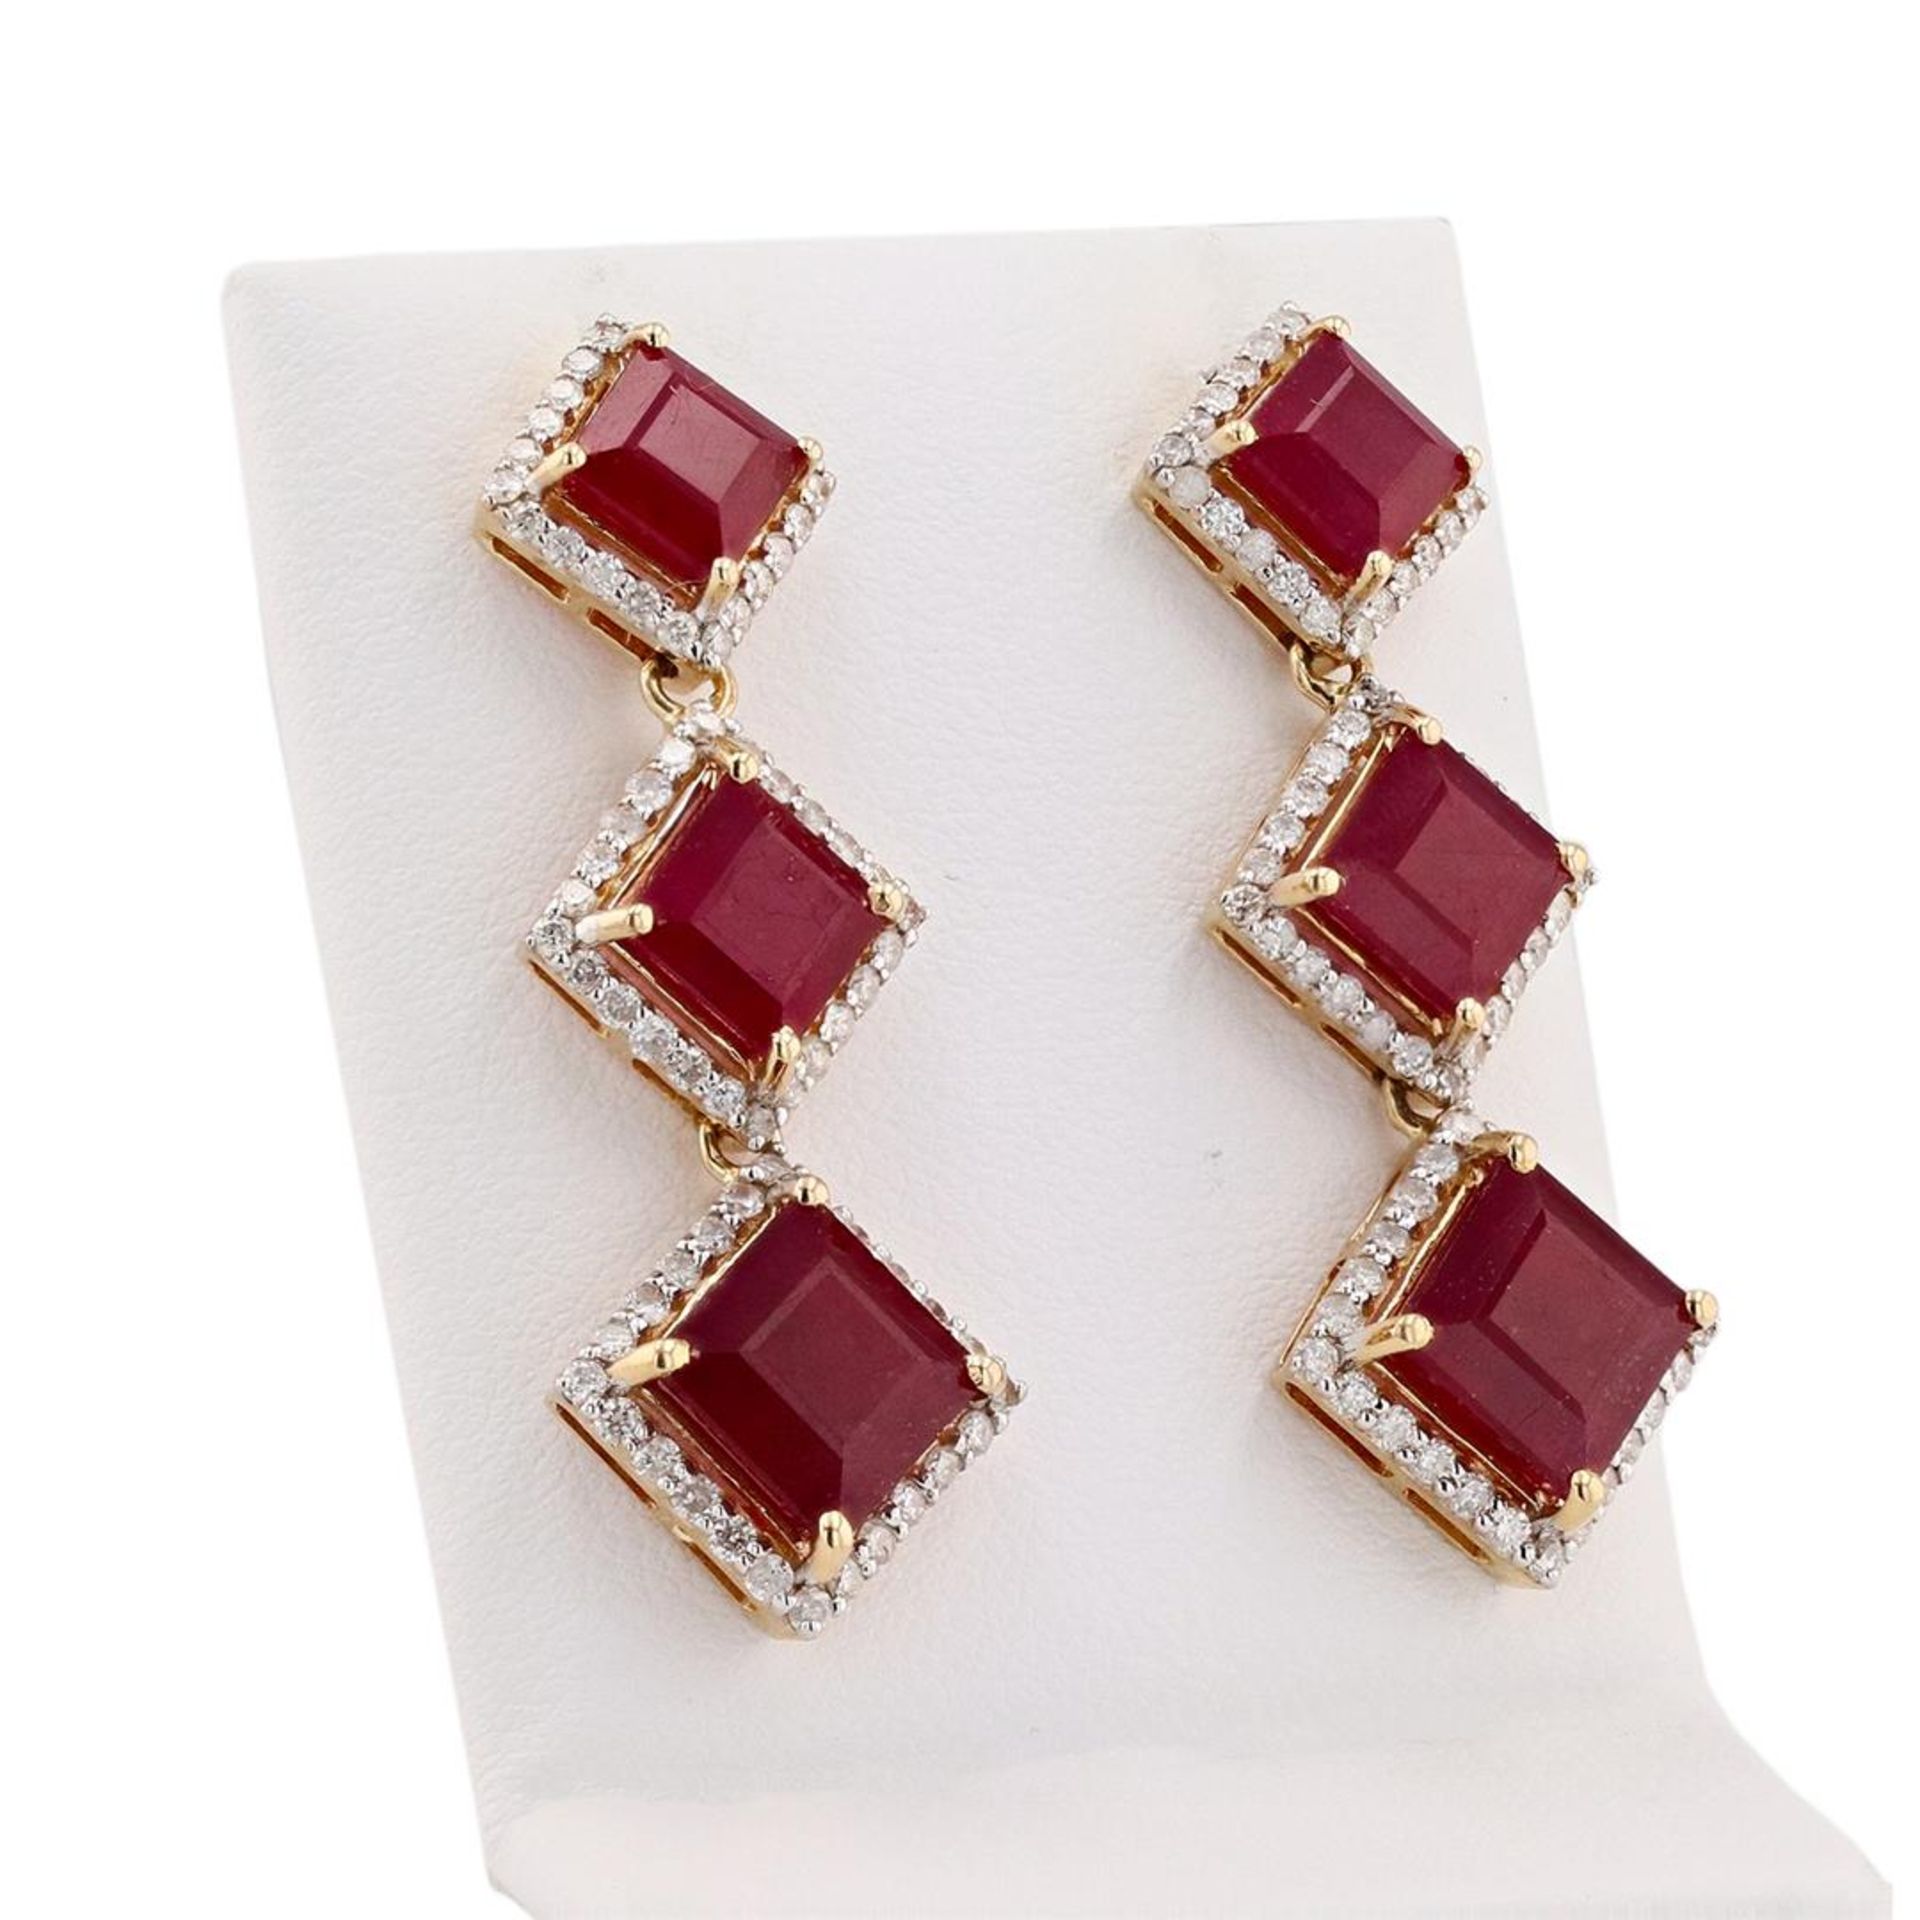 16.77 ctw Ruby and 1.41 ctw Diamond 14K Yellow Gold Earrings - Image 2 of 4